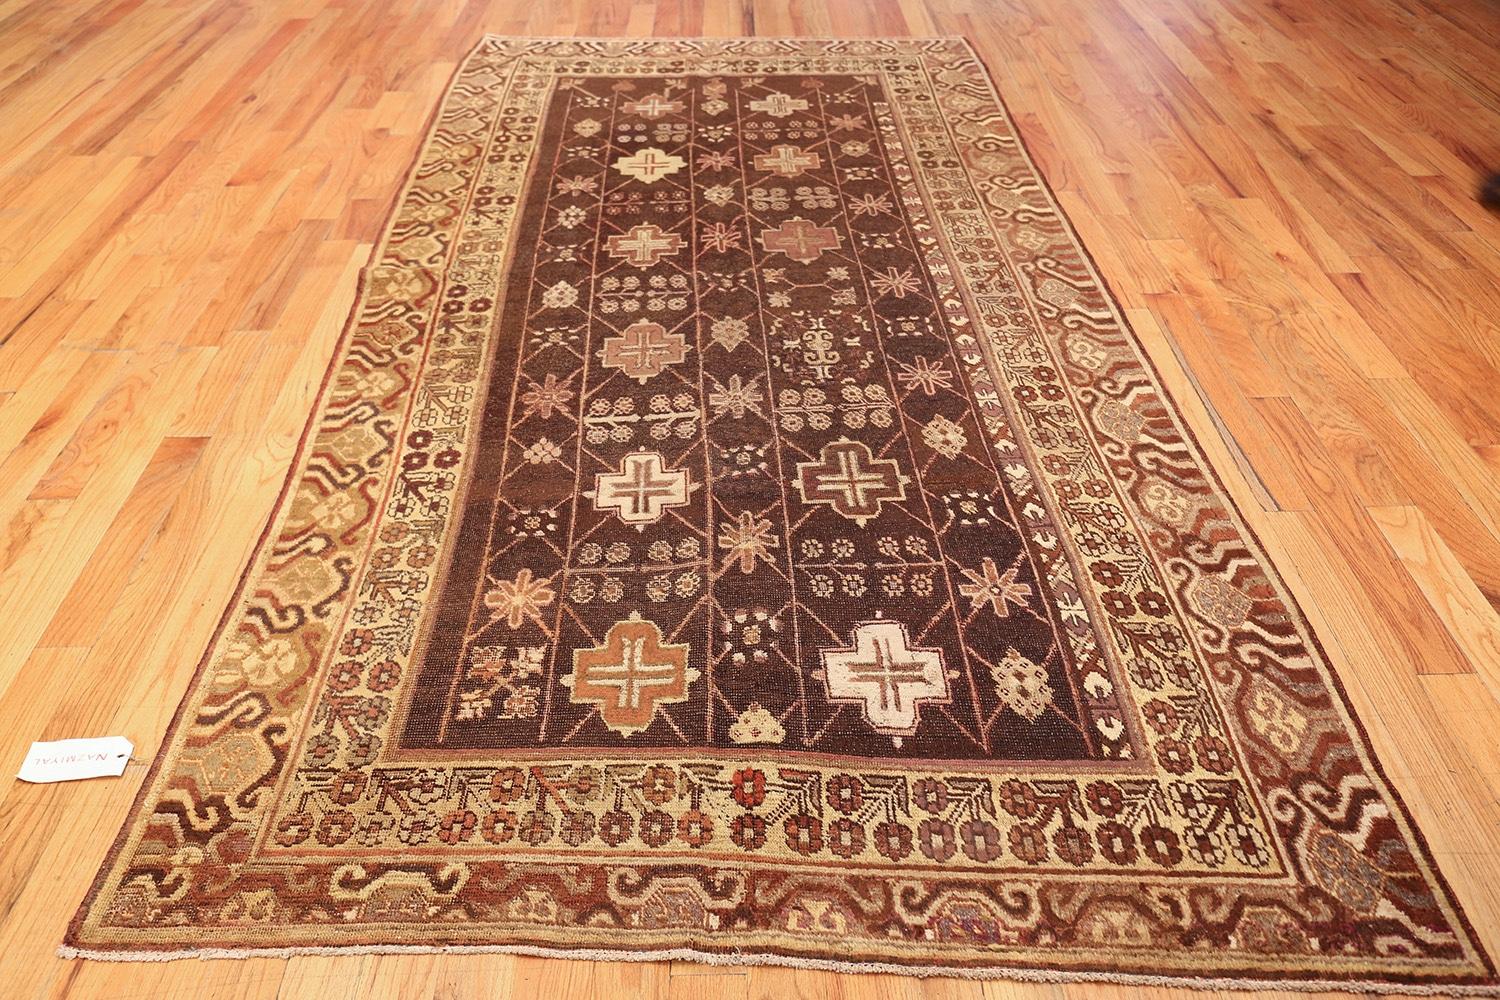 Brown Tribal and Geometric Antique Khotan Rug, Origin: East Turkestan, Circa: 1900 – Though produced along the Silk Road just to the west of China and Tibet, antique Khotan rugs like this reflect the design of Middle Eastern carpets as well. Her the